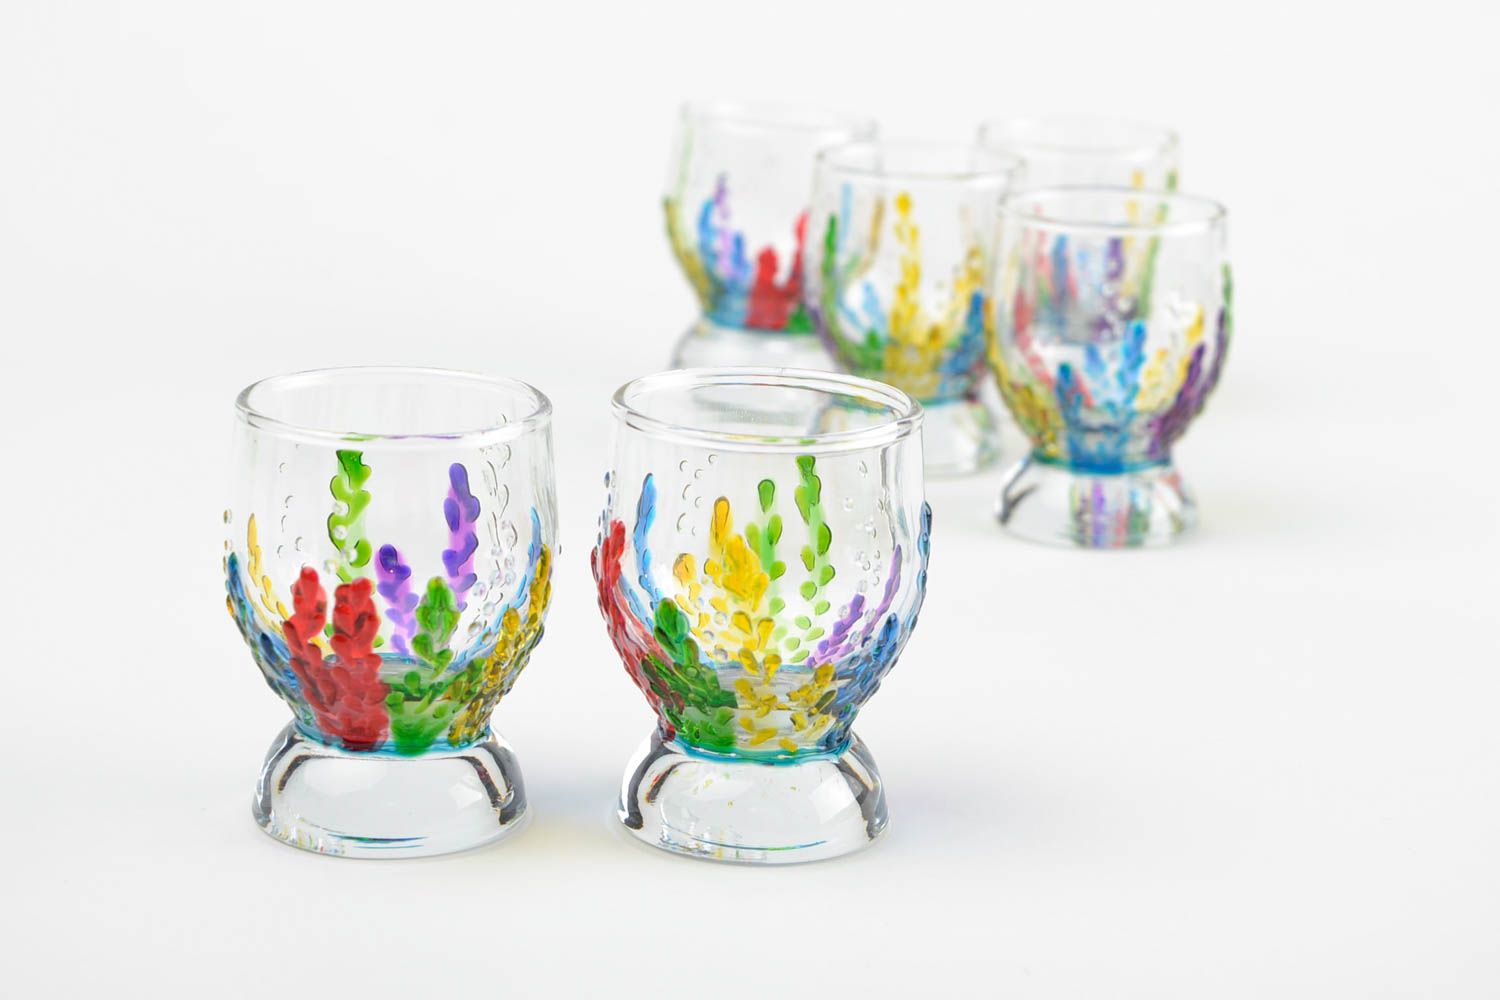 Unusual handmade shot glass shot glasses set 6 pieces painted glass gift ideas photo 5